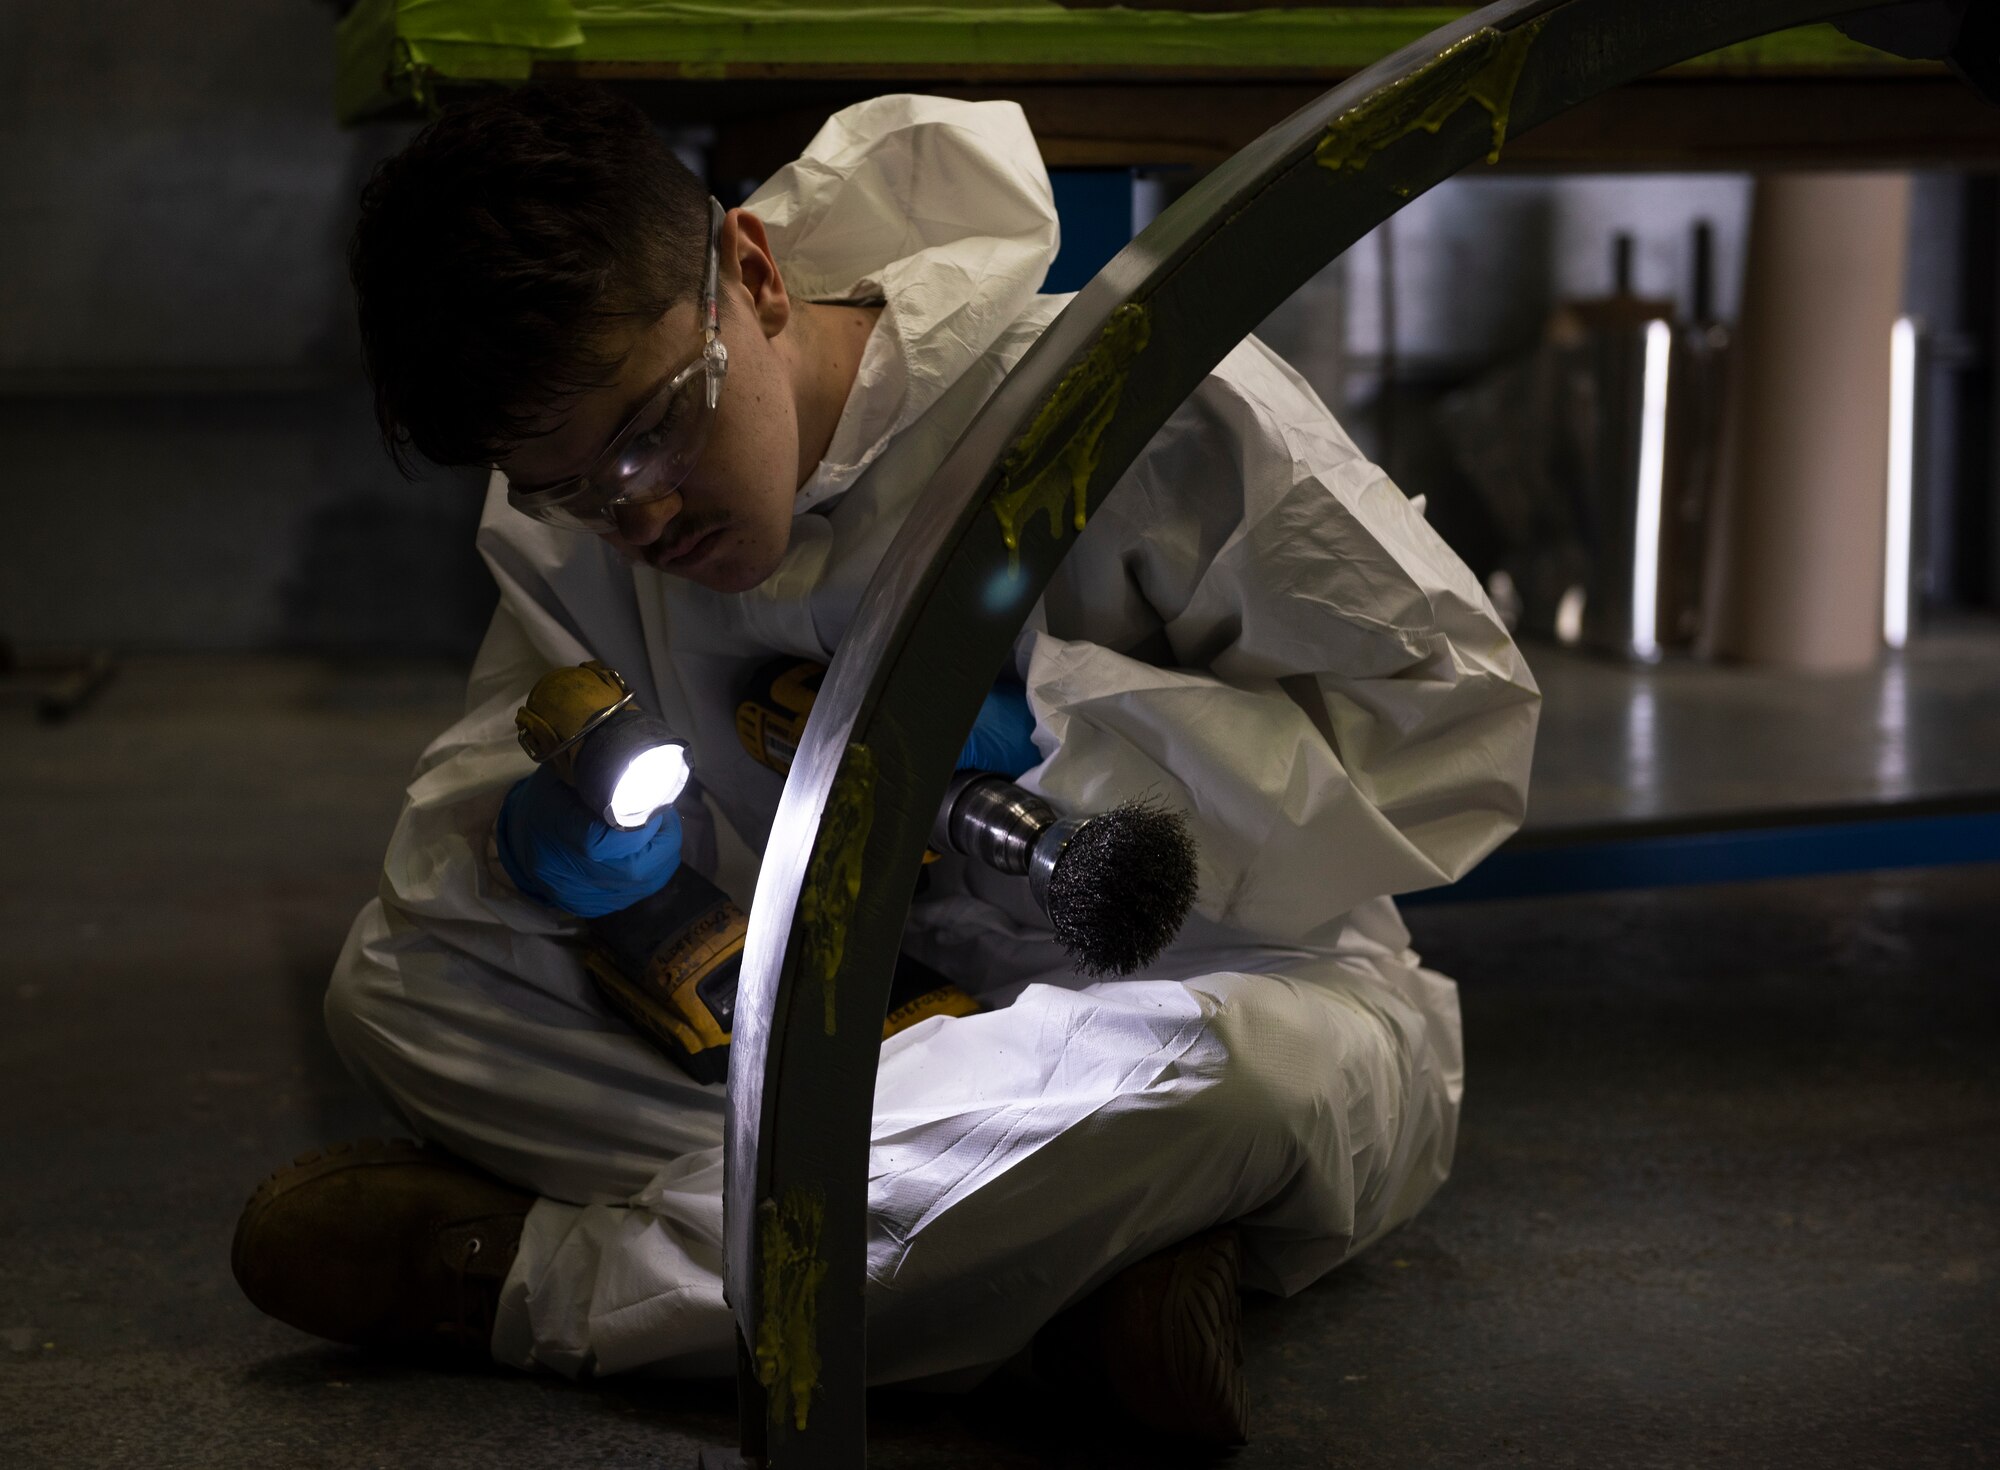 Senior Airman Tristan Casner, 48th Equipment Maintenance Squadron Fabrication Flight, inspects an aircraft component at Royal Air Force Lakenheath, England, Sept. 15, 2020. The Fabrication Flight maintains the structural integrity of aircraft using specialized tools and equipment to repair damage and fabricate replacement parts, ensuring the 48th Fighter Wing remains a ready and capable force. (U.S. Air Force photo by Airman 1st Class Jessi Monte)